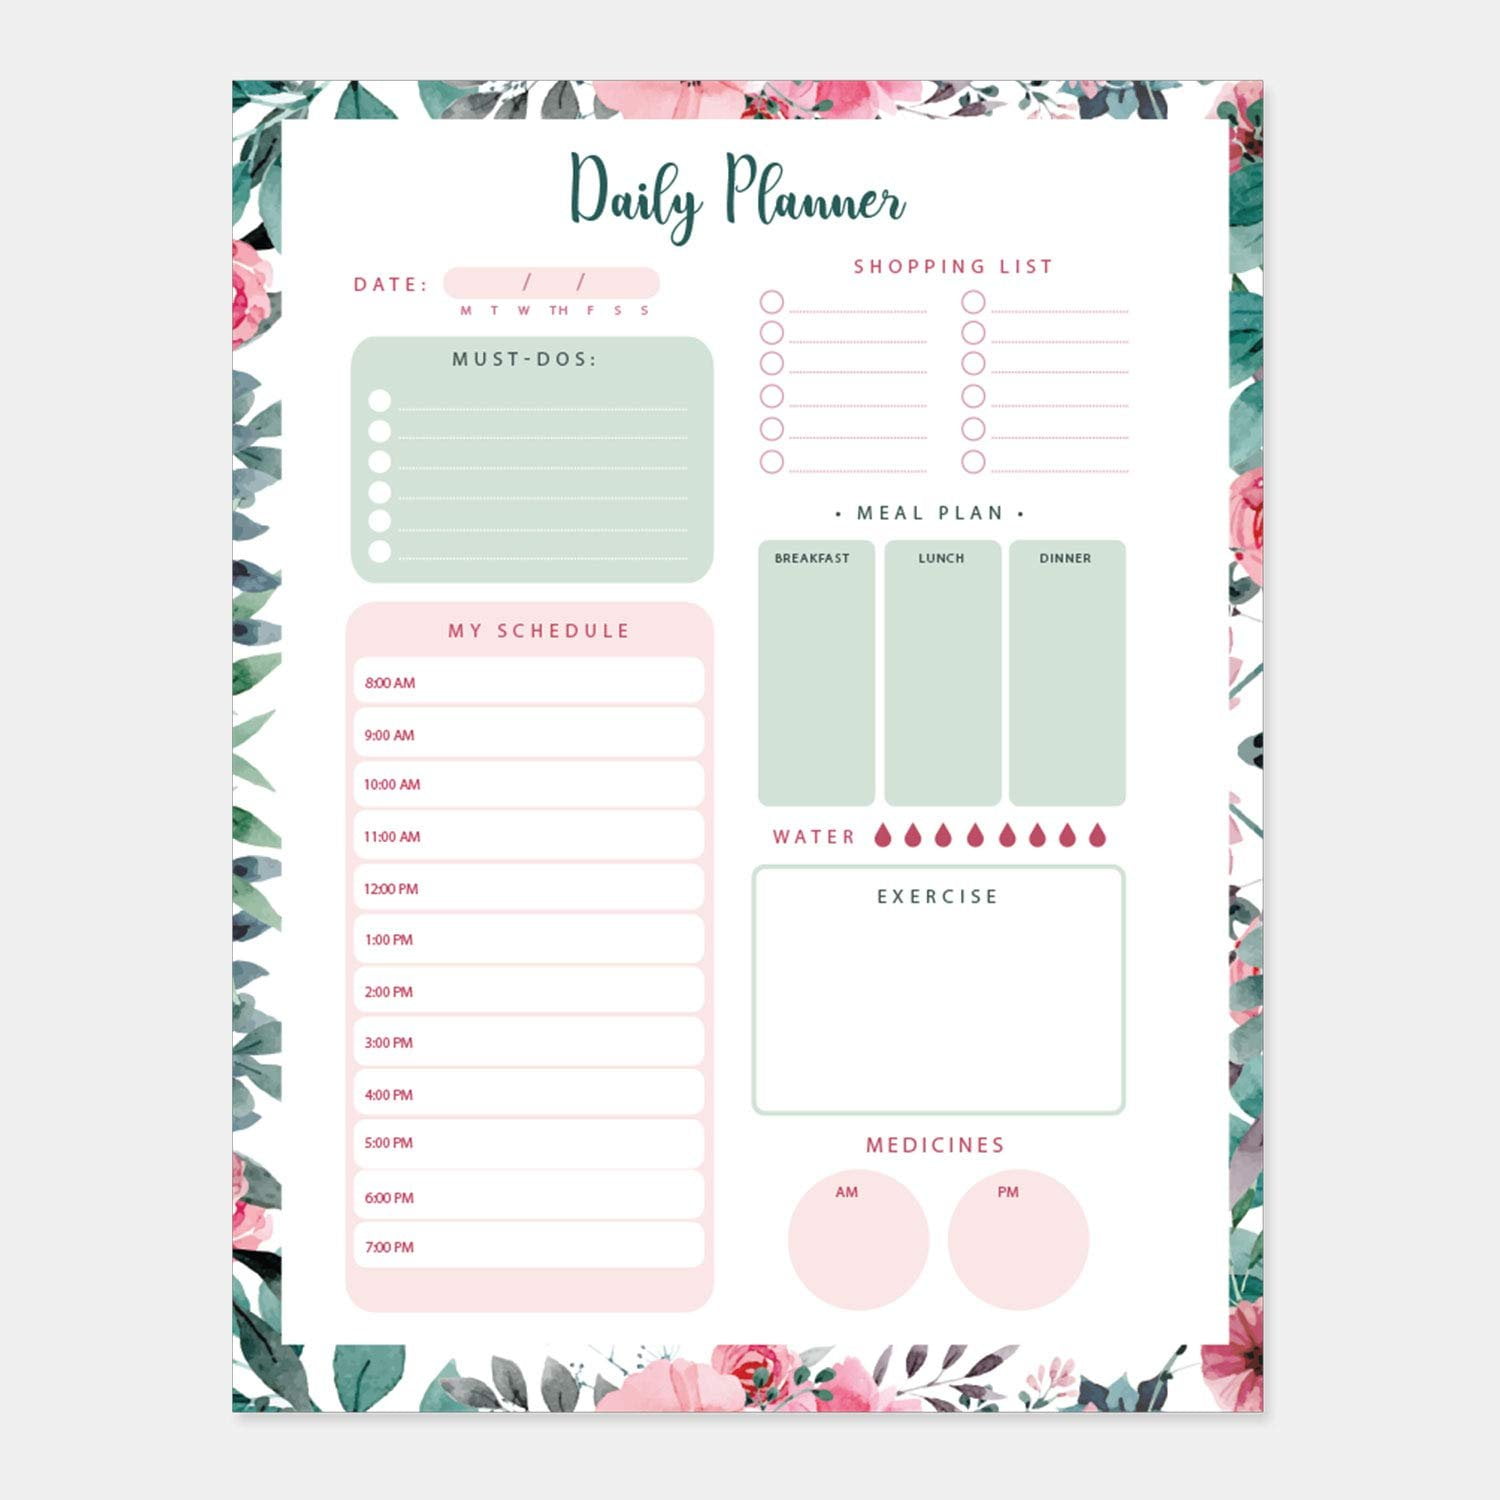 Daily Planner 50 Sheets Of 8 5x11 Inches Undated Checklist Organizer 